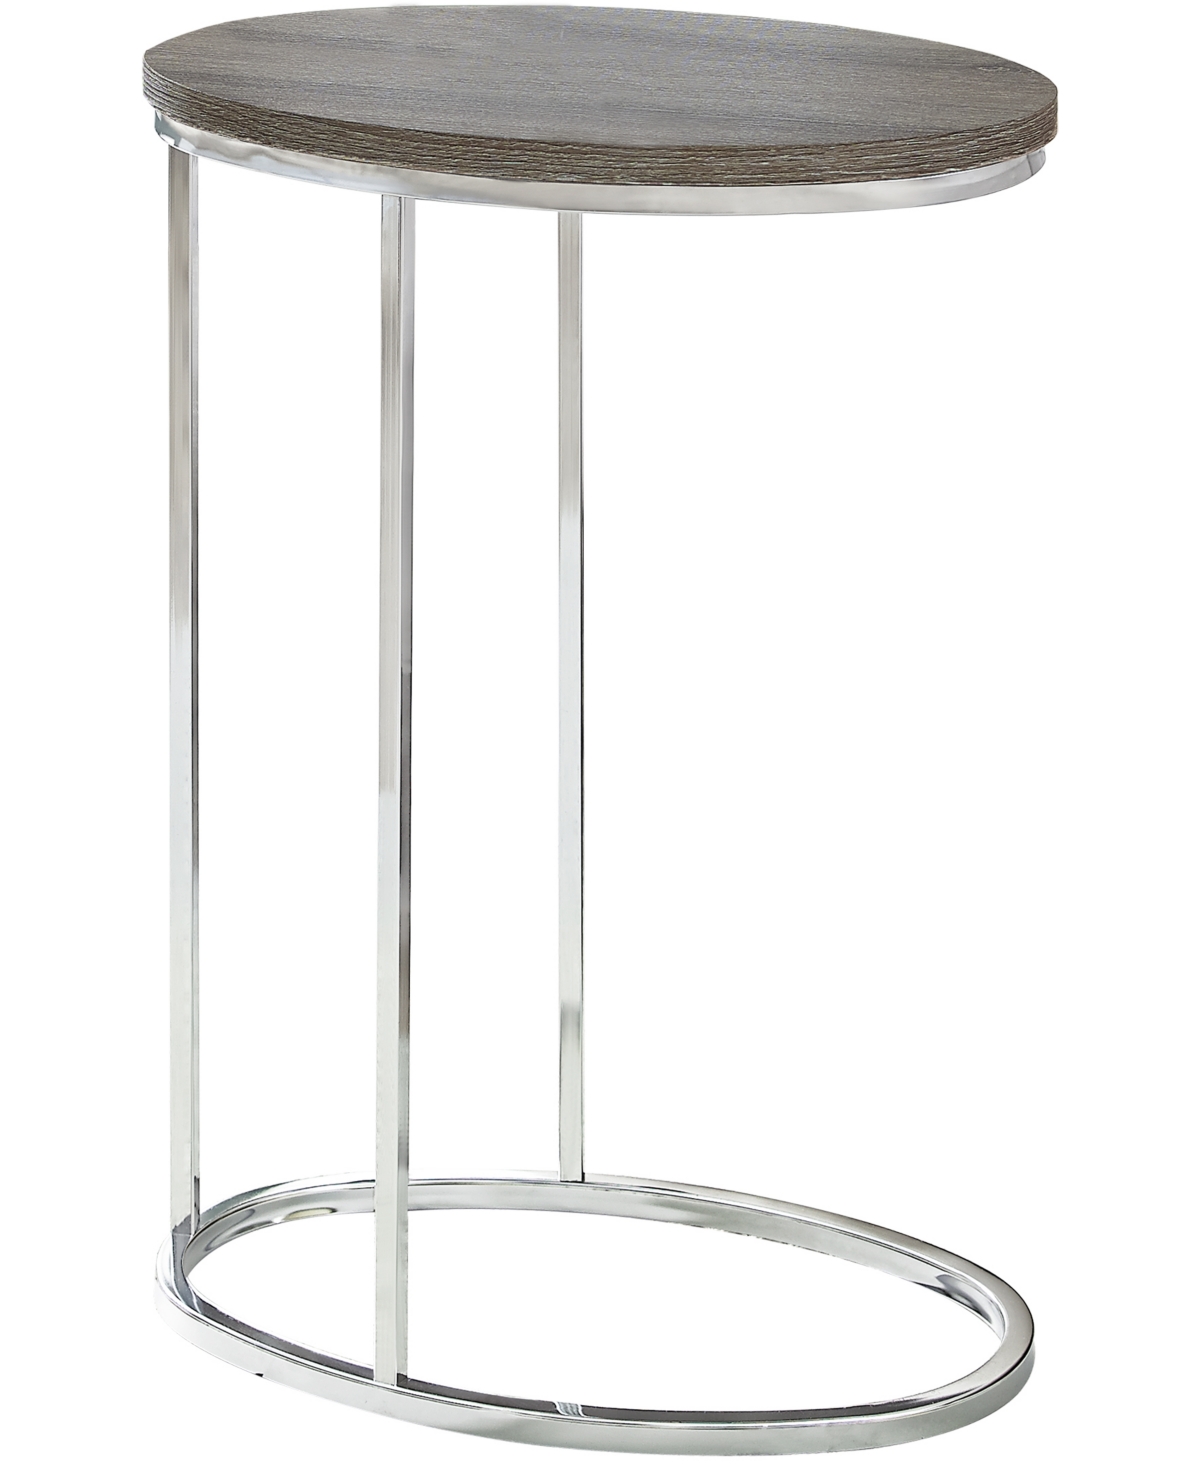 UPC 680796000011 product image for Monarch Specialties Chrome Metal Oval Edgeside Accent Table in Dark Taupe | upcitemdb.com